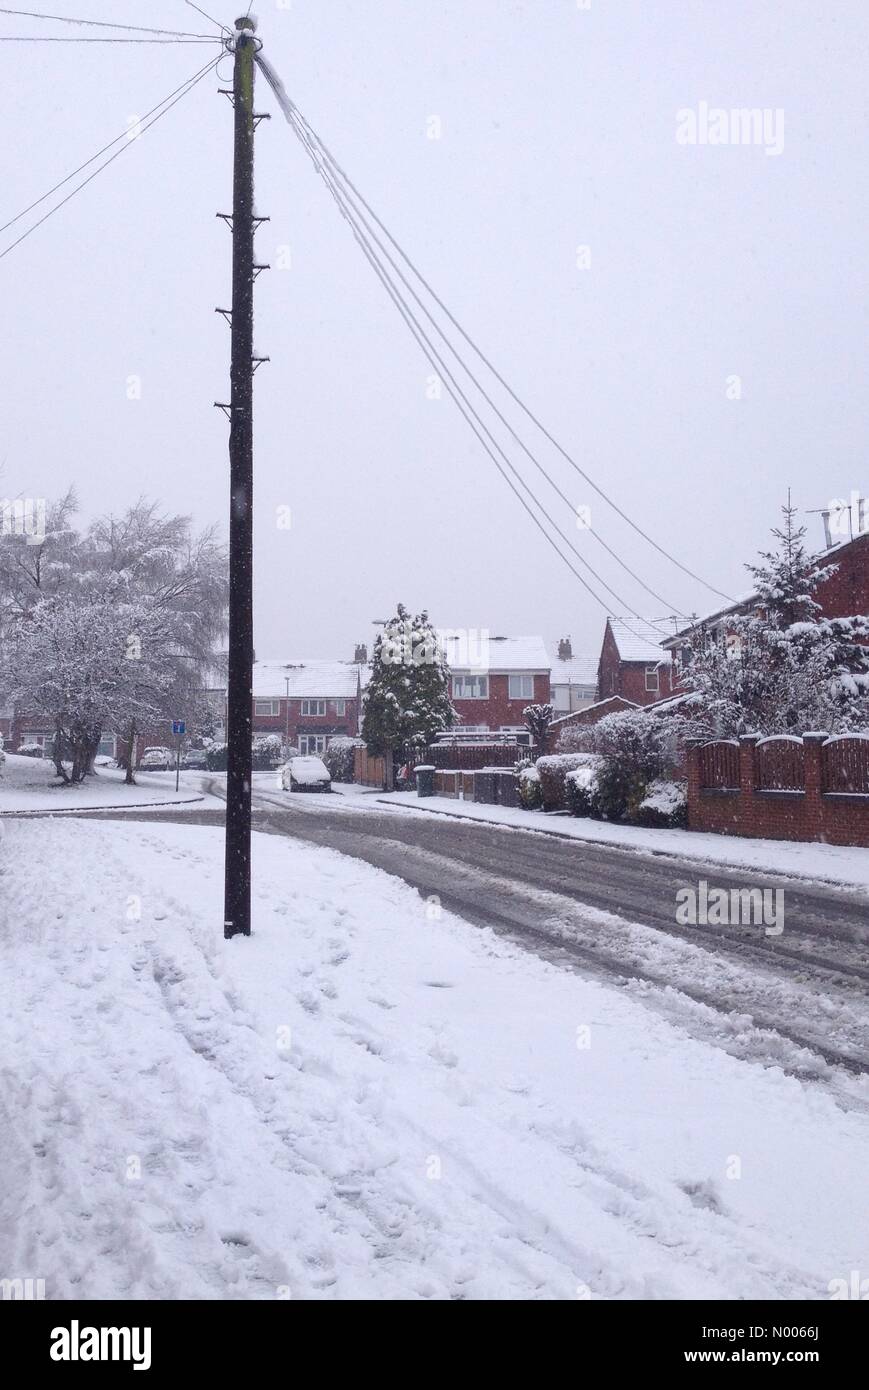 UK weather- two inch of snow fall overnight in Morley near Leeds. Taken on the 4 th March 2016. Stock Photo